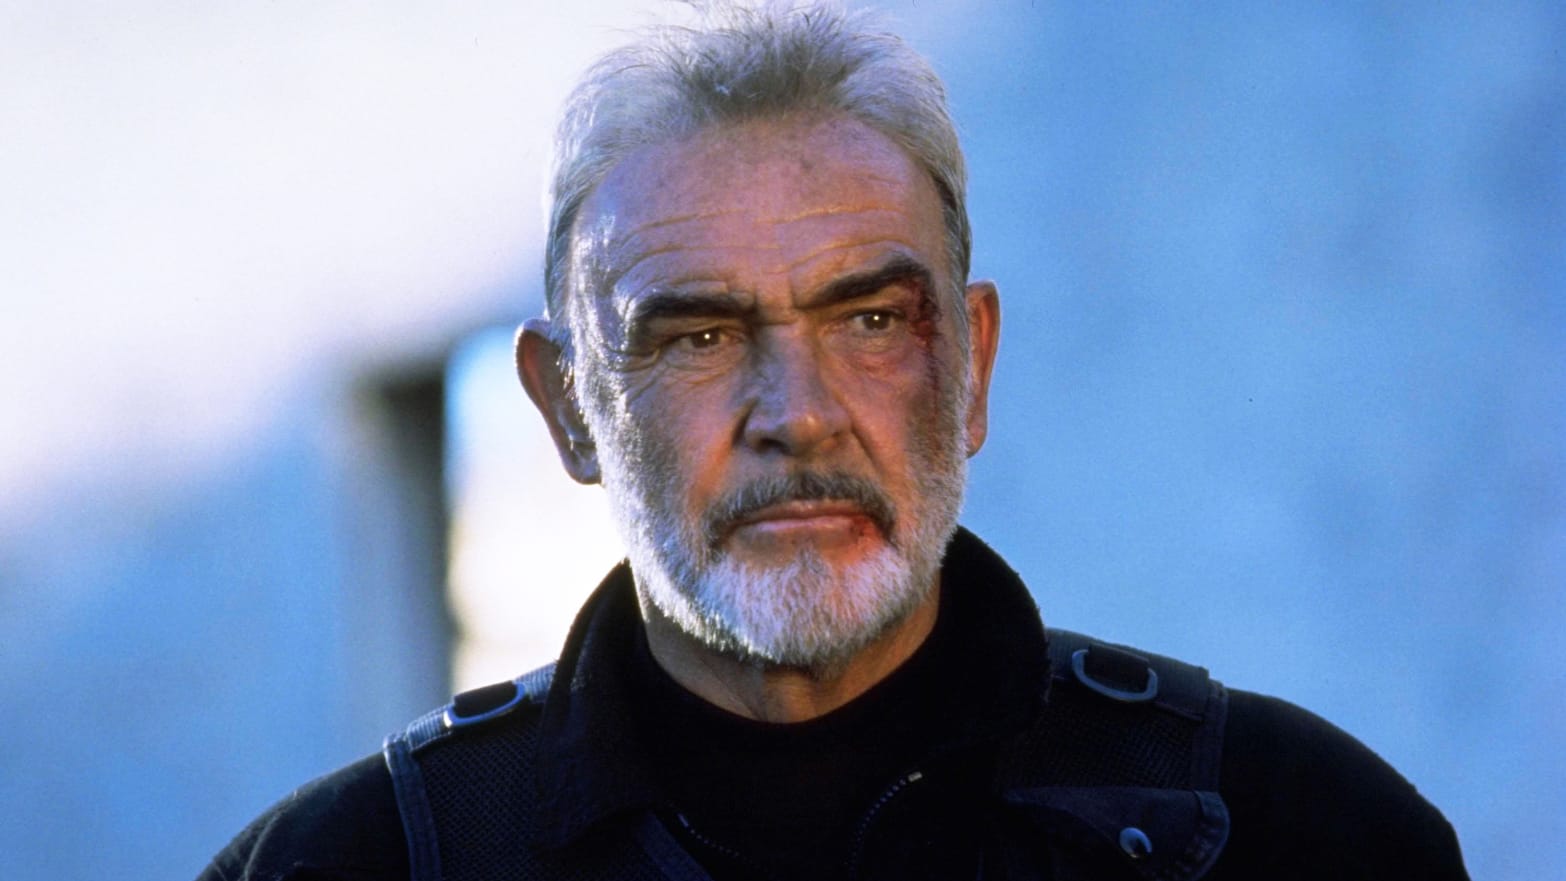 Forget James Bond. Sean Connery Was Sexiest In 'The Rock'